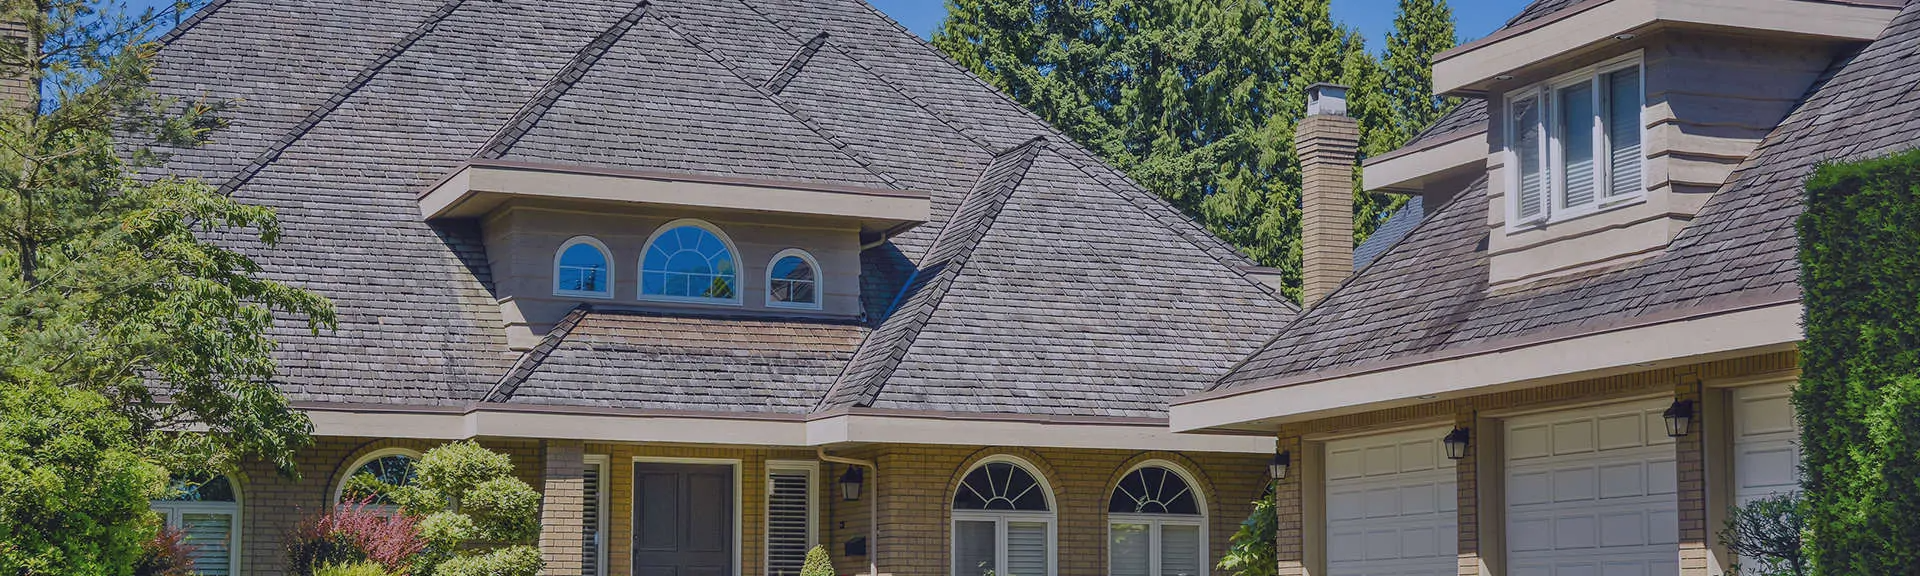 Overhead Constructions offers residential roofing services for shingle and flat roofs including the installation, maintenance, and repair of TPO, PVC, and EPDM Black Rubber Membrane roofing materials.